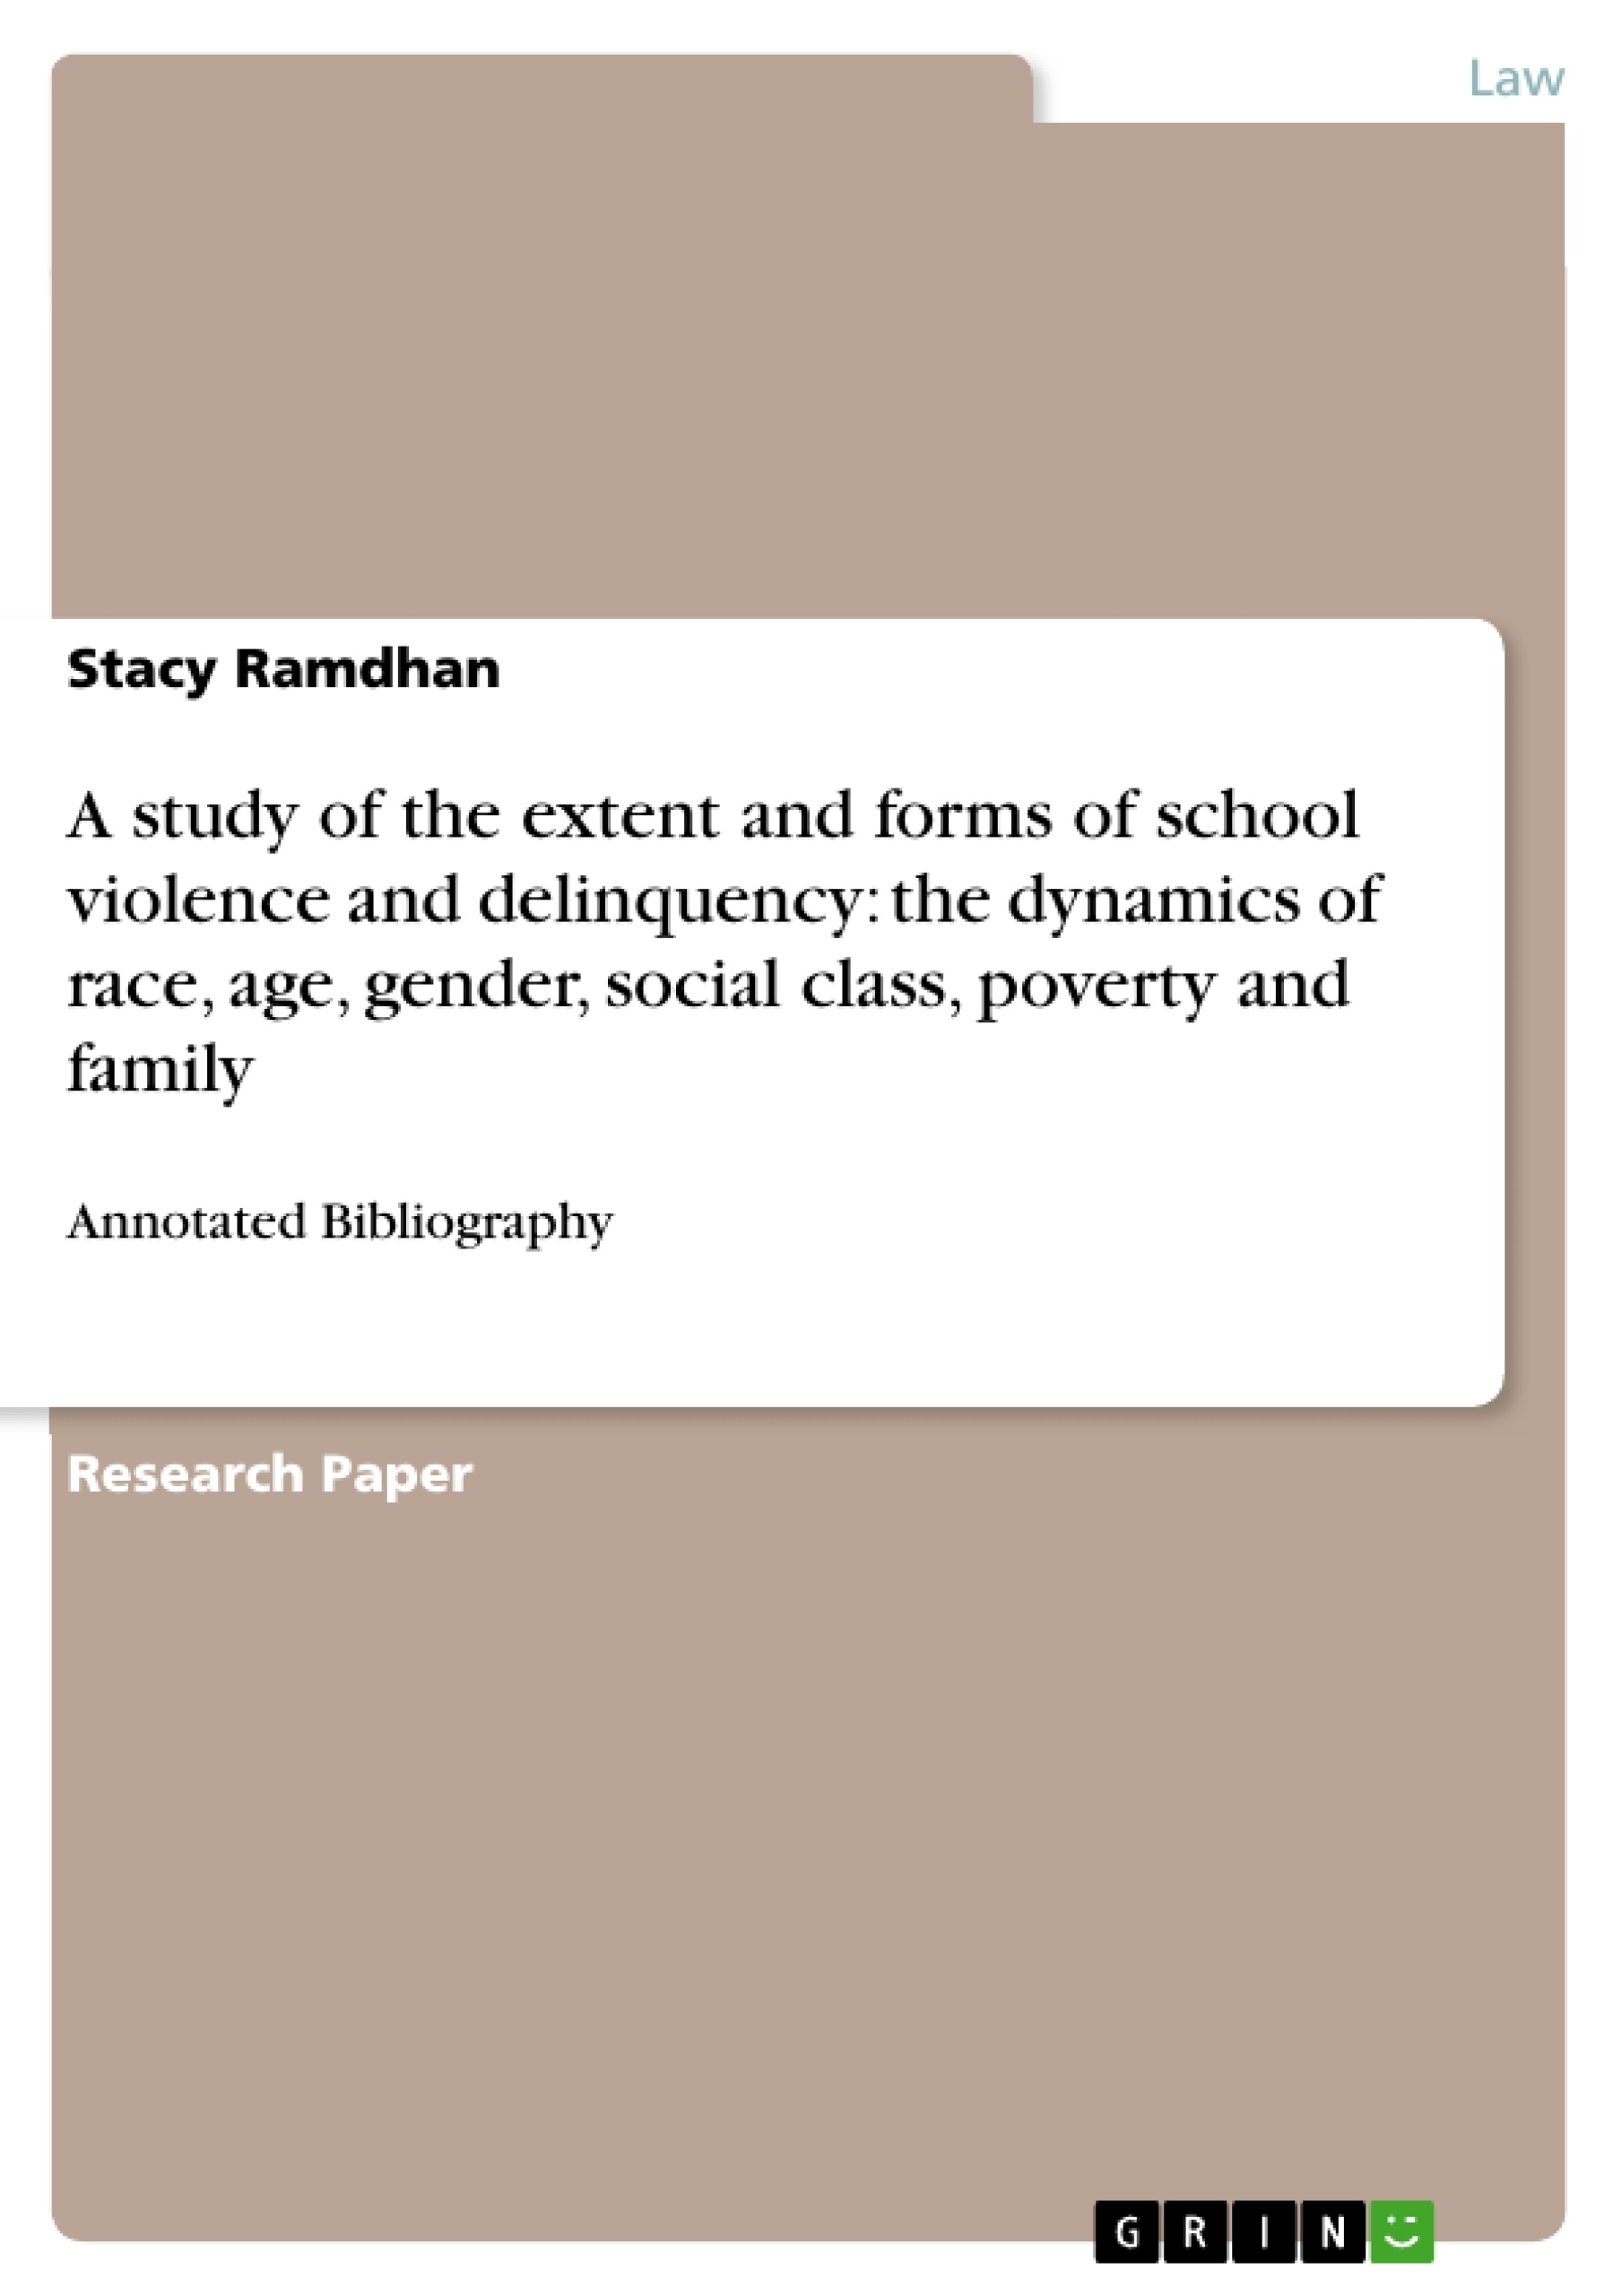 Título: A study of the extent and forms of school violence and delinquency: the dynamics of race, age, gender, social class, poverty and family